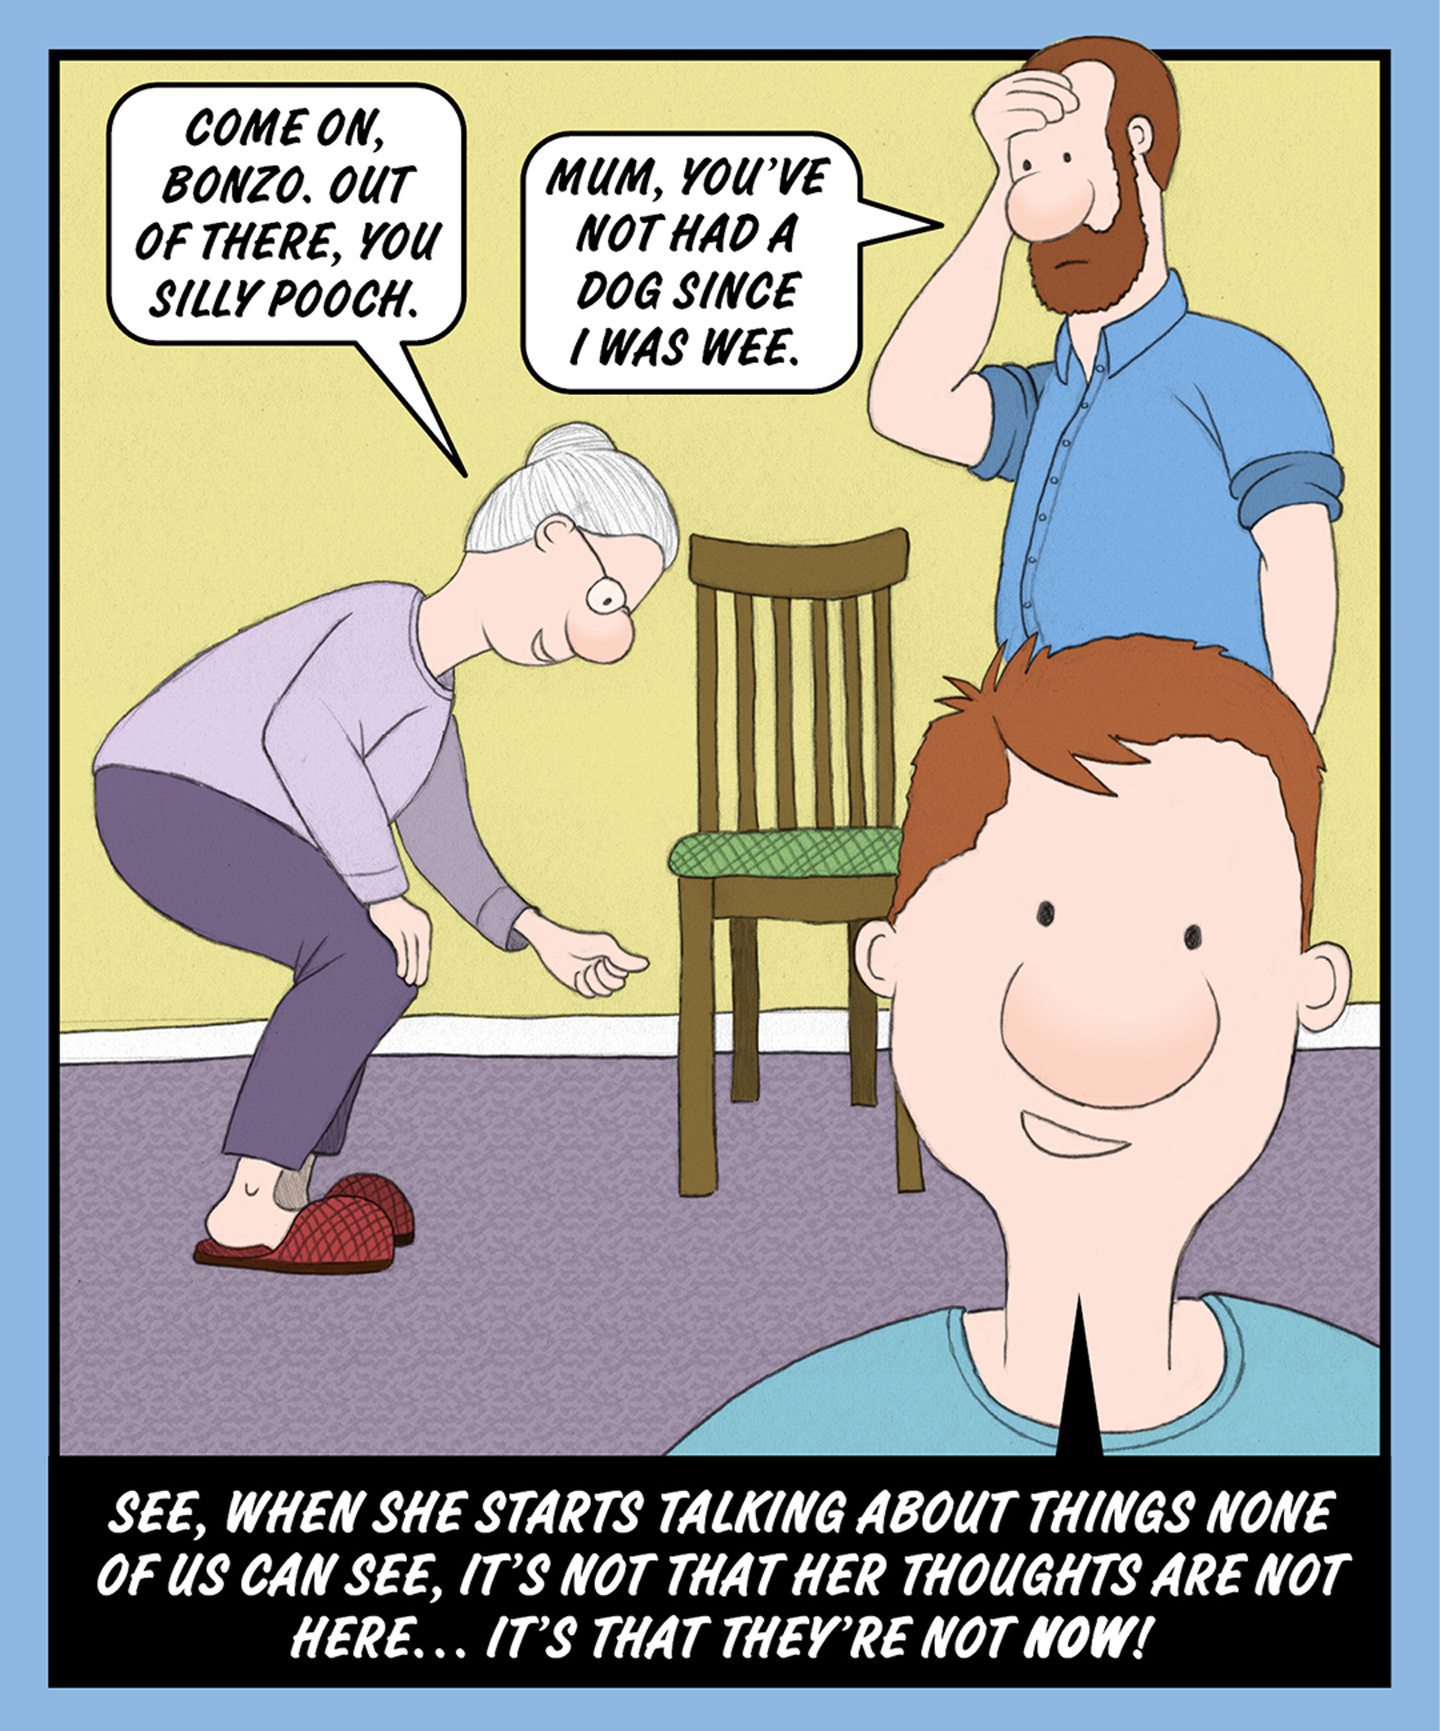 A comic illustration of a young boy in front of a granny and an older man. The speech bubble from the granny reads: COME ON, BONZO. OUT OF THERE, YOU SILLY POOCH. The speech bubble from the older man reads: MUM, YOU'VE NOT HAD A DOG SINCE I WAS WEE. The text below the image reads: SEE, WHEN SHE STARTS TALKING ABOUT THINGS NONE OF US CAN SEE, IT'S NOT THAT HER THOUGHTS ARE NOT HERE… IT'S THAT THEY'RE NOT NOW!